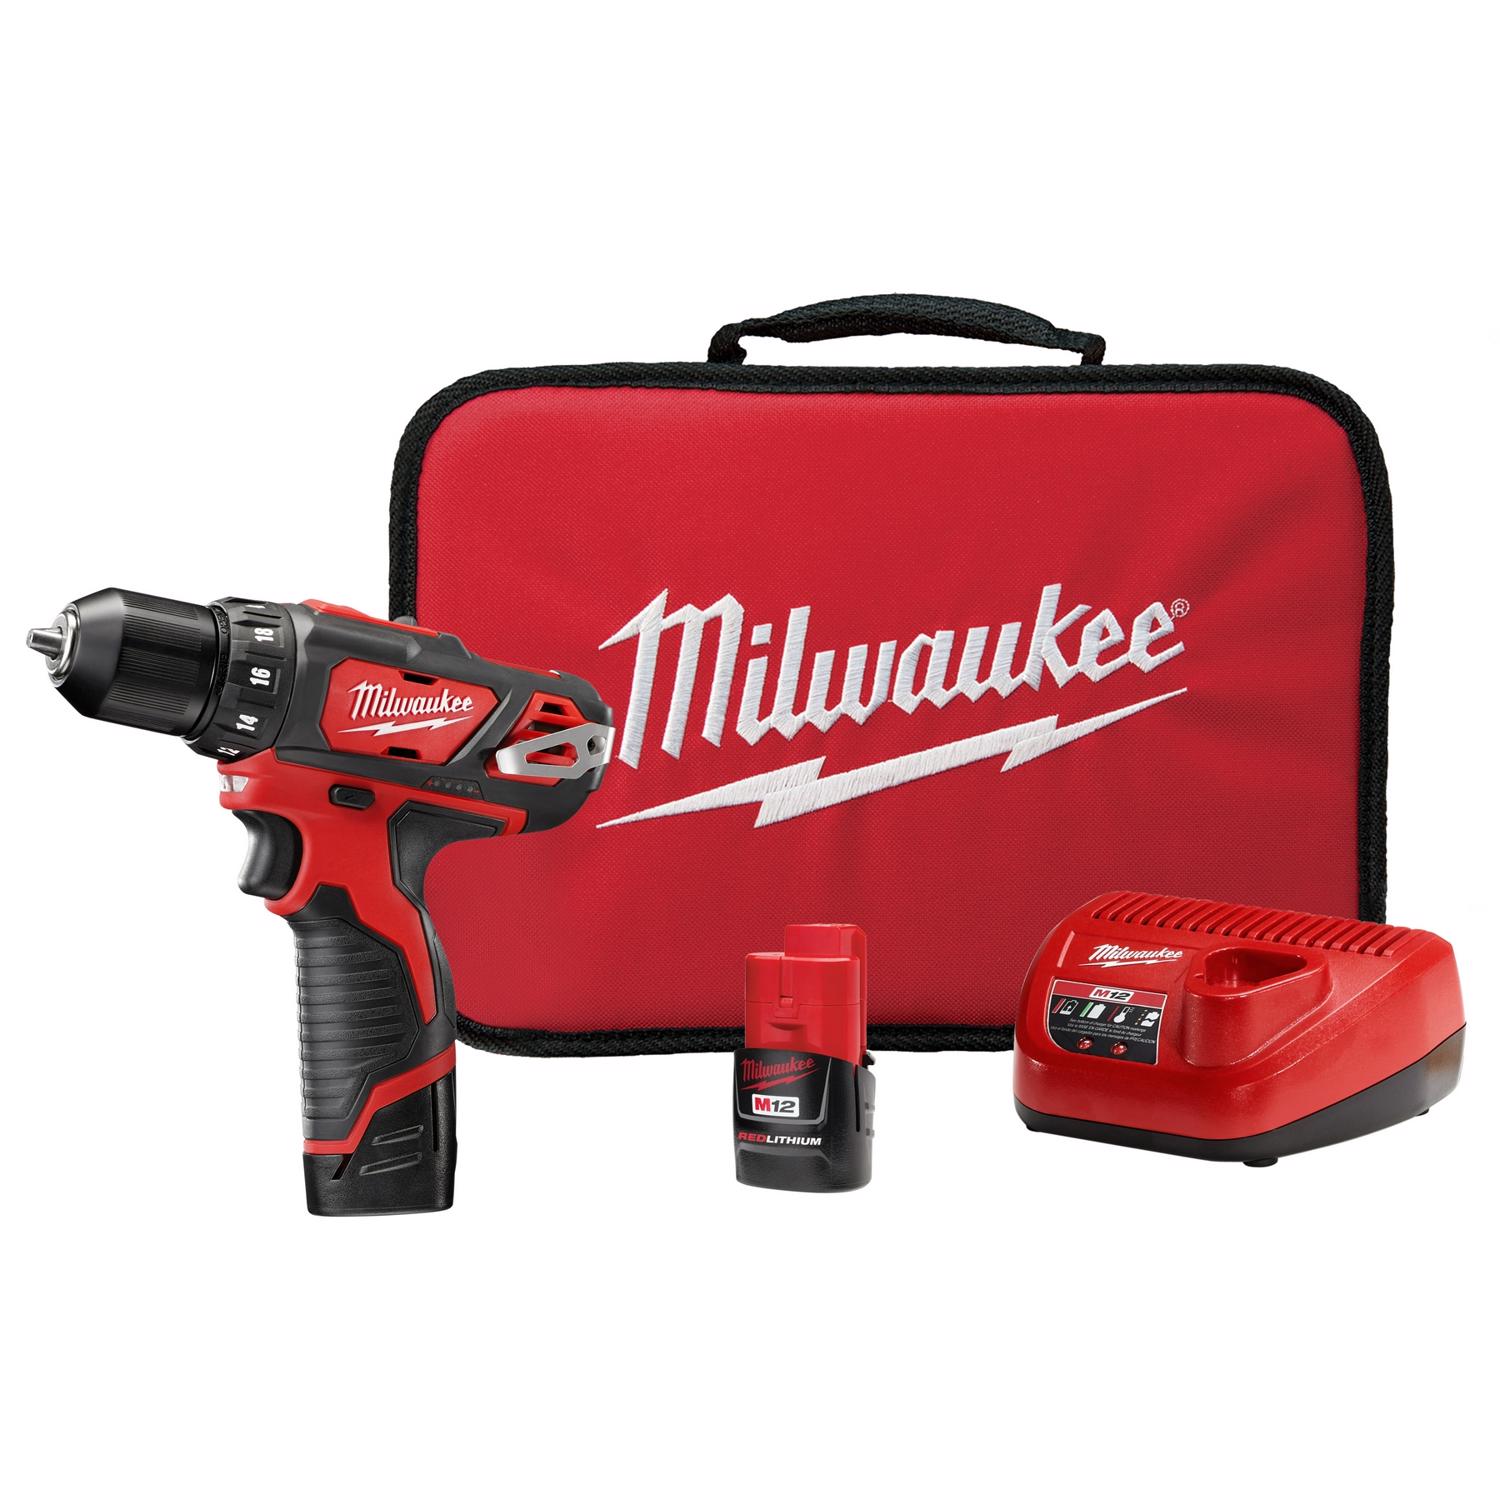 Photos - Drill / Screwdriver Milwaukee M12 3/8 in. Brushed Cordless Drill/Driver Kit (Battery & Charger 